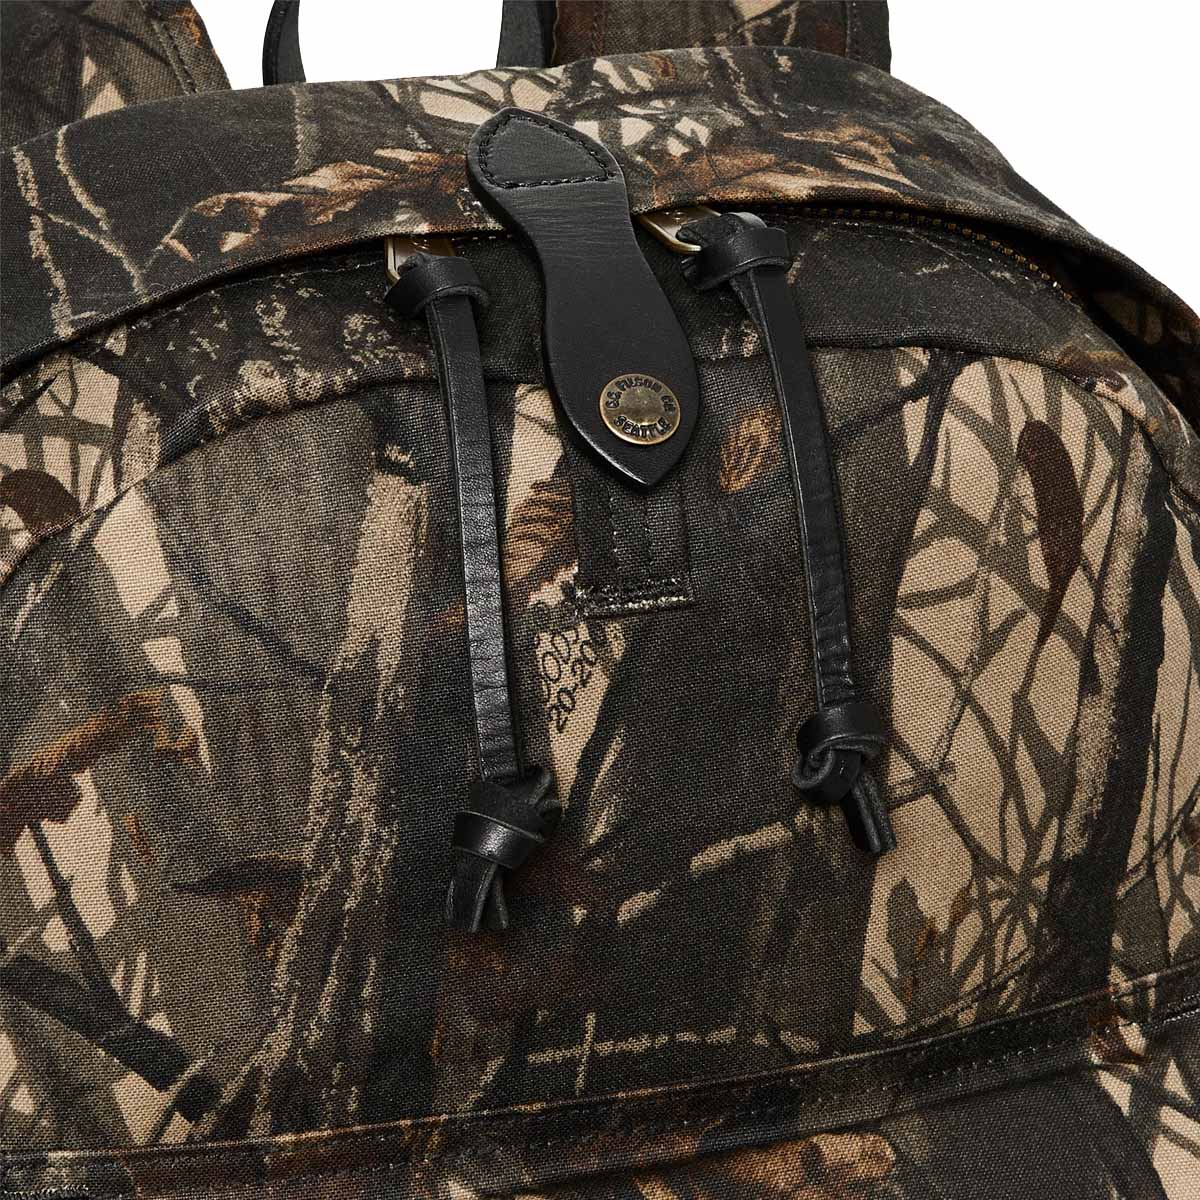 Filson Journeyman Backpack Realtree Hardwoods Camo, the best backpack for your vintage outfit